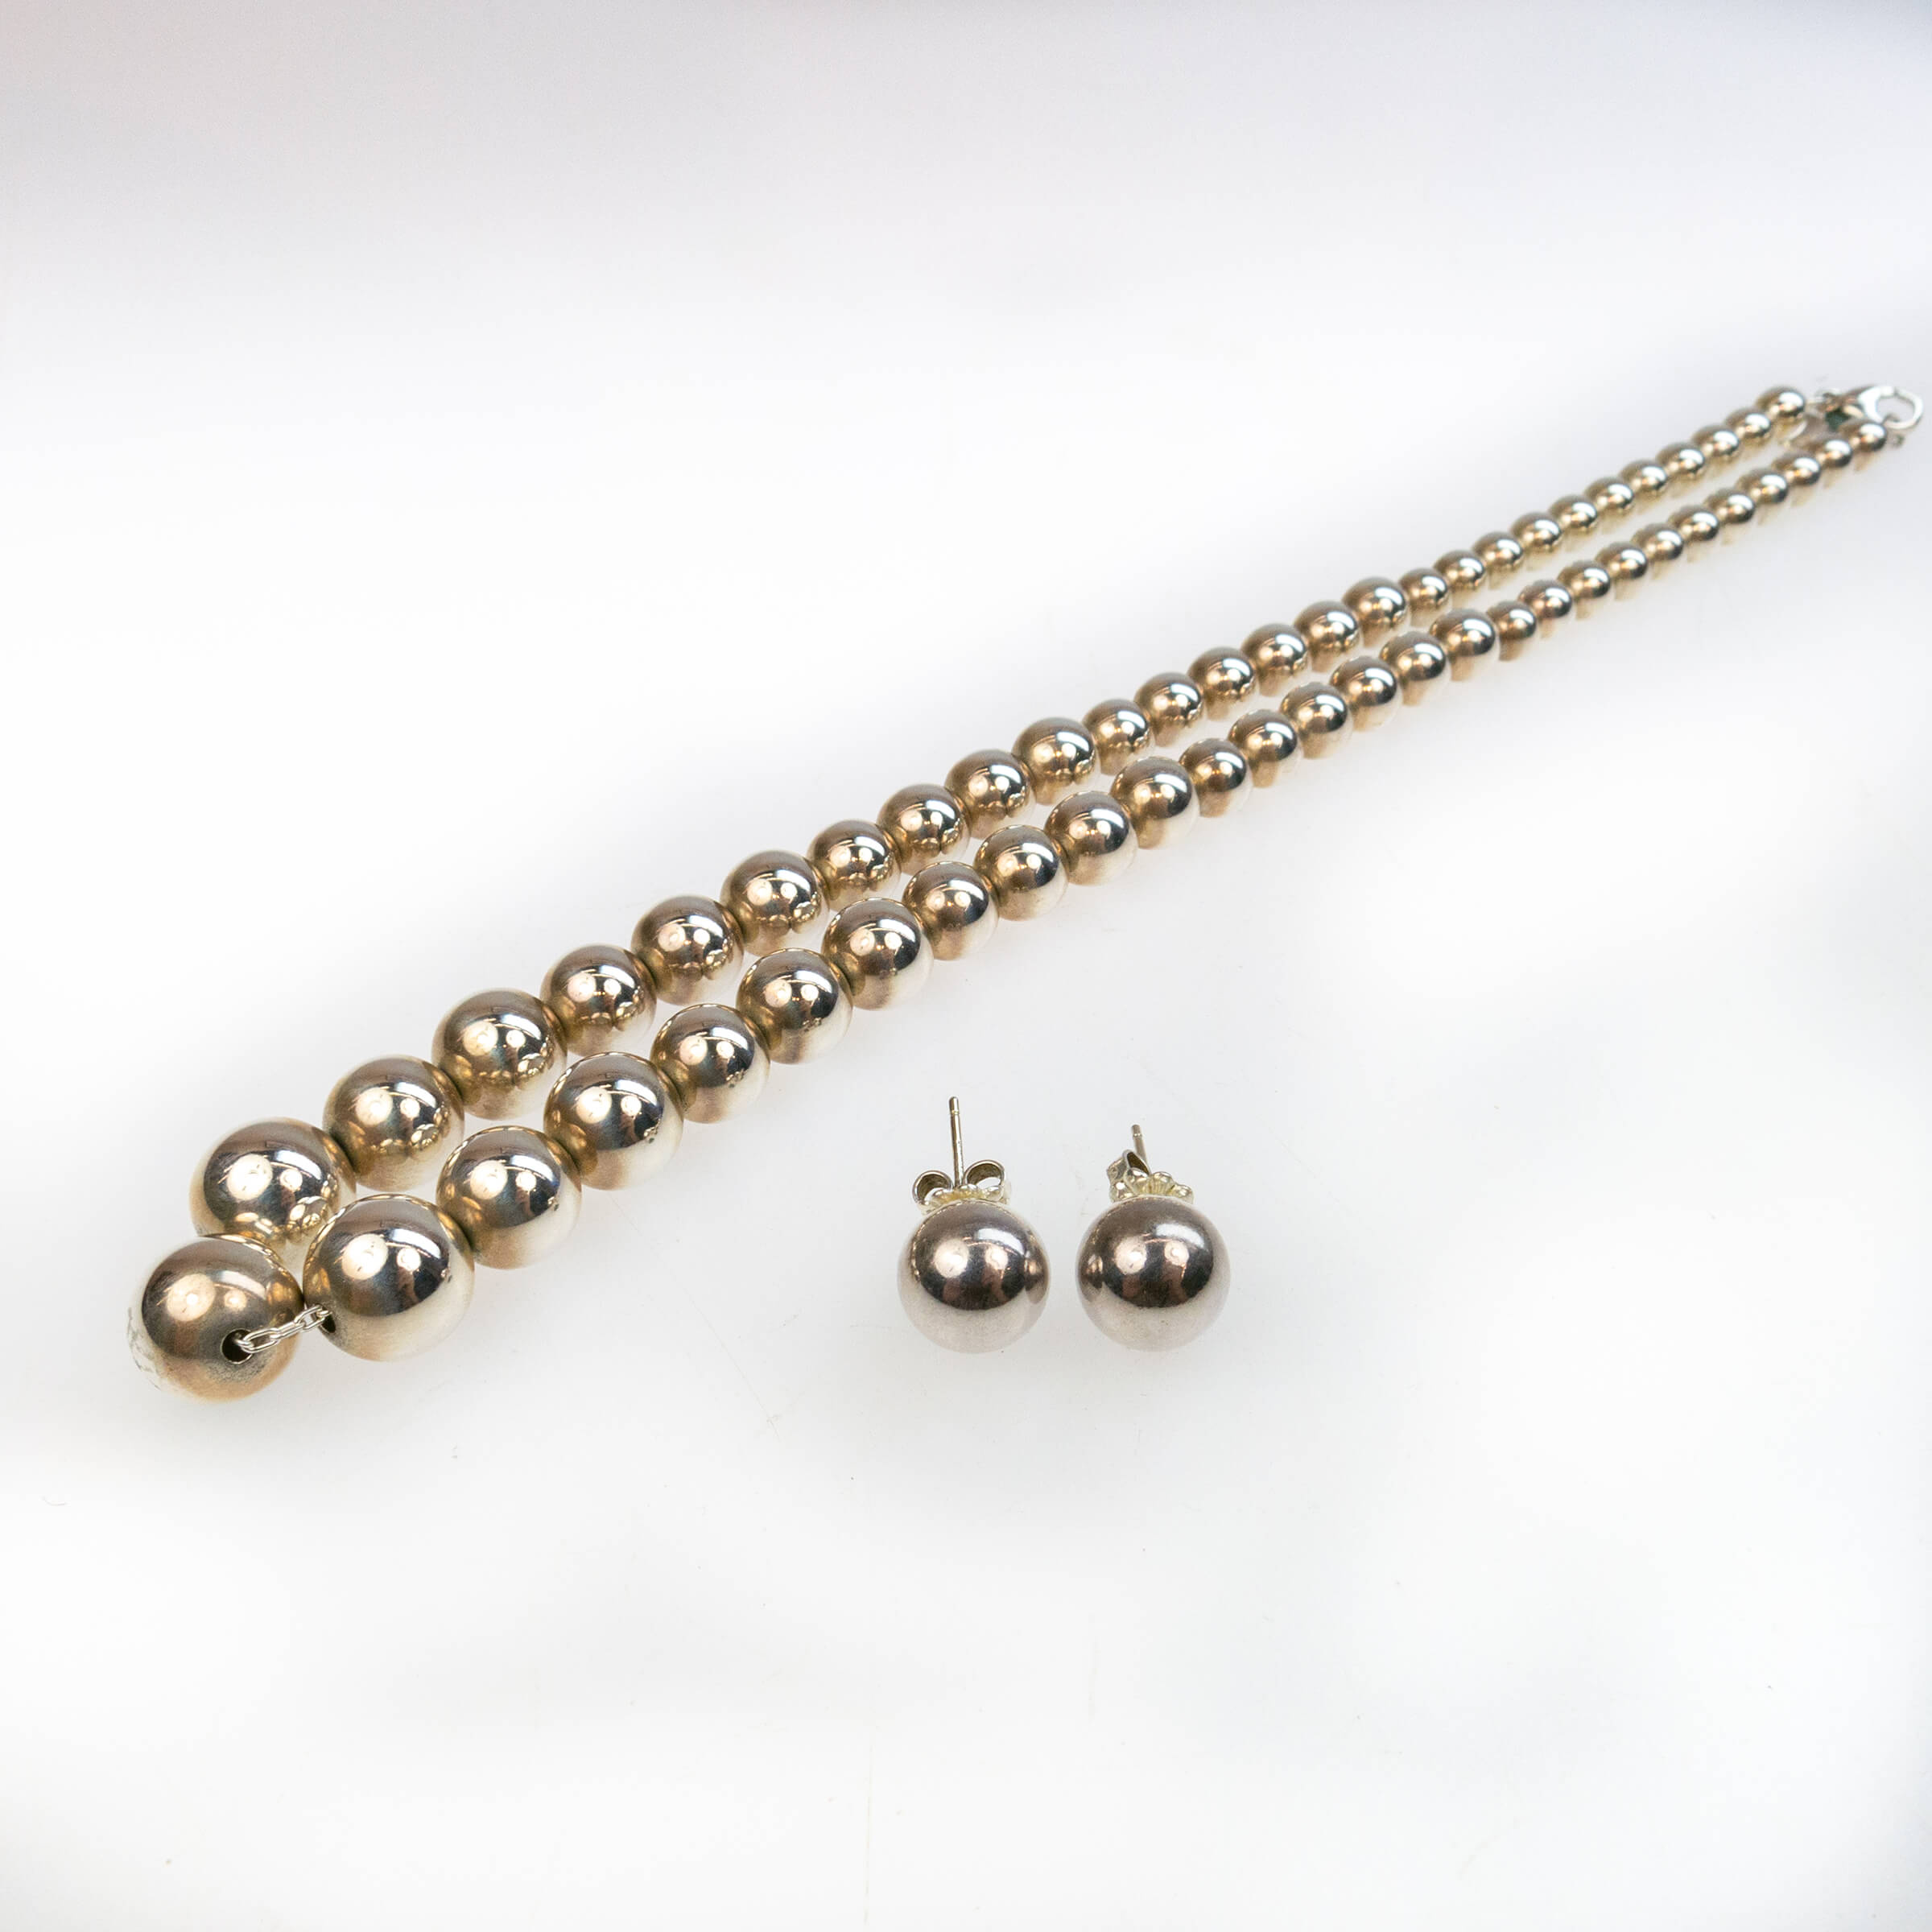 Tiffany & Co. Sterling Silver Graduated Bead Necklace And Stud Earrings